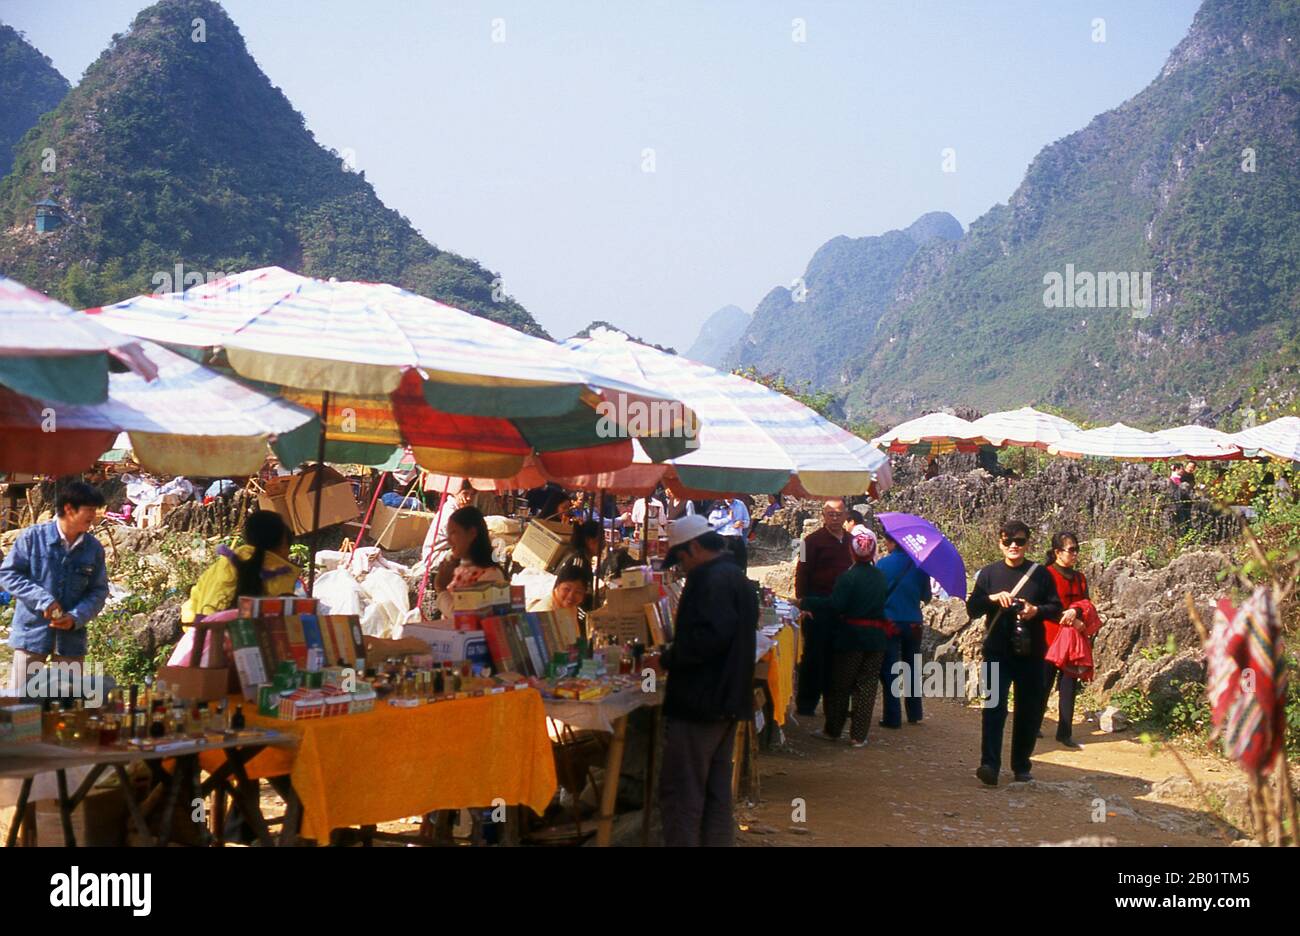 China/Vietnam: Border market at the Ban Gioc or Detian Falls, on the Vietnamese-Chinese border, Guangxi Province (China) and Cao Bang Province (Vietnam).  Ban Gioc-Detian Falls (Vietnamese: Thác Bản Giốc & Thác Đức Thiên) are 2 waterfalls on the Quây Sơn River or Guichun River straddling the Sino-Vietnamese border, located in the Karst hills of Daxin County in the Chongzuo prefecture-level city of Guangxi Province, on the Chinese side, and in the district of Trung Khanh District, Cao Bằng province on the Vietnamese side, 272 km north of Hanoi. Stock Photo